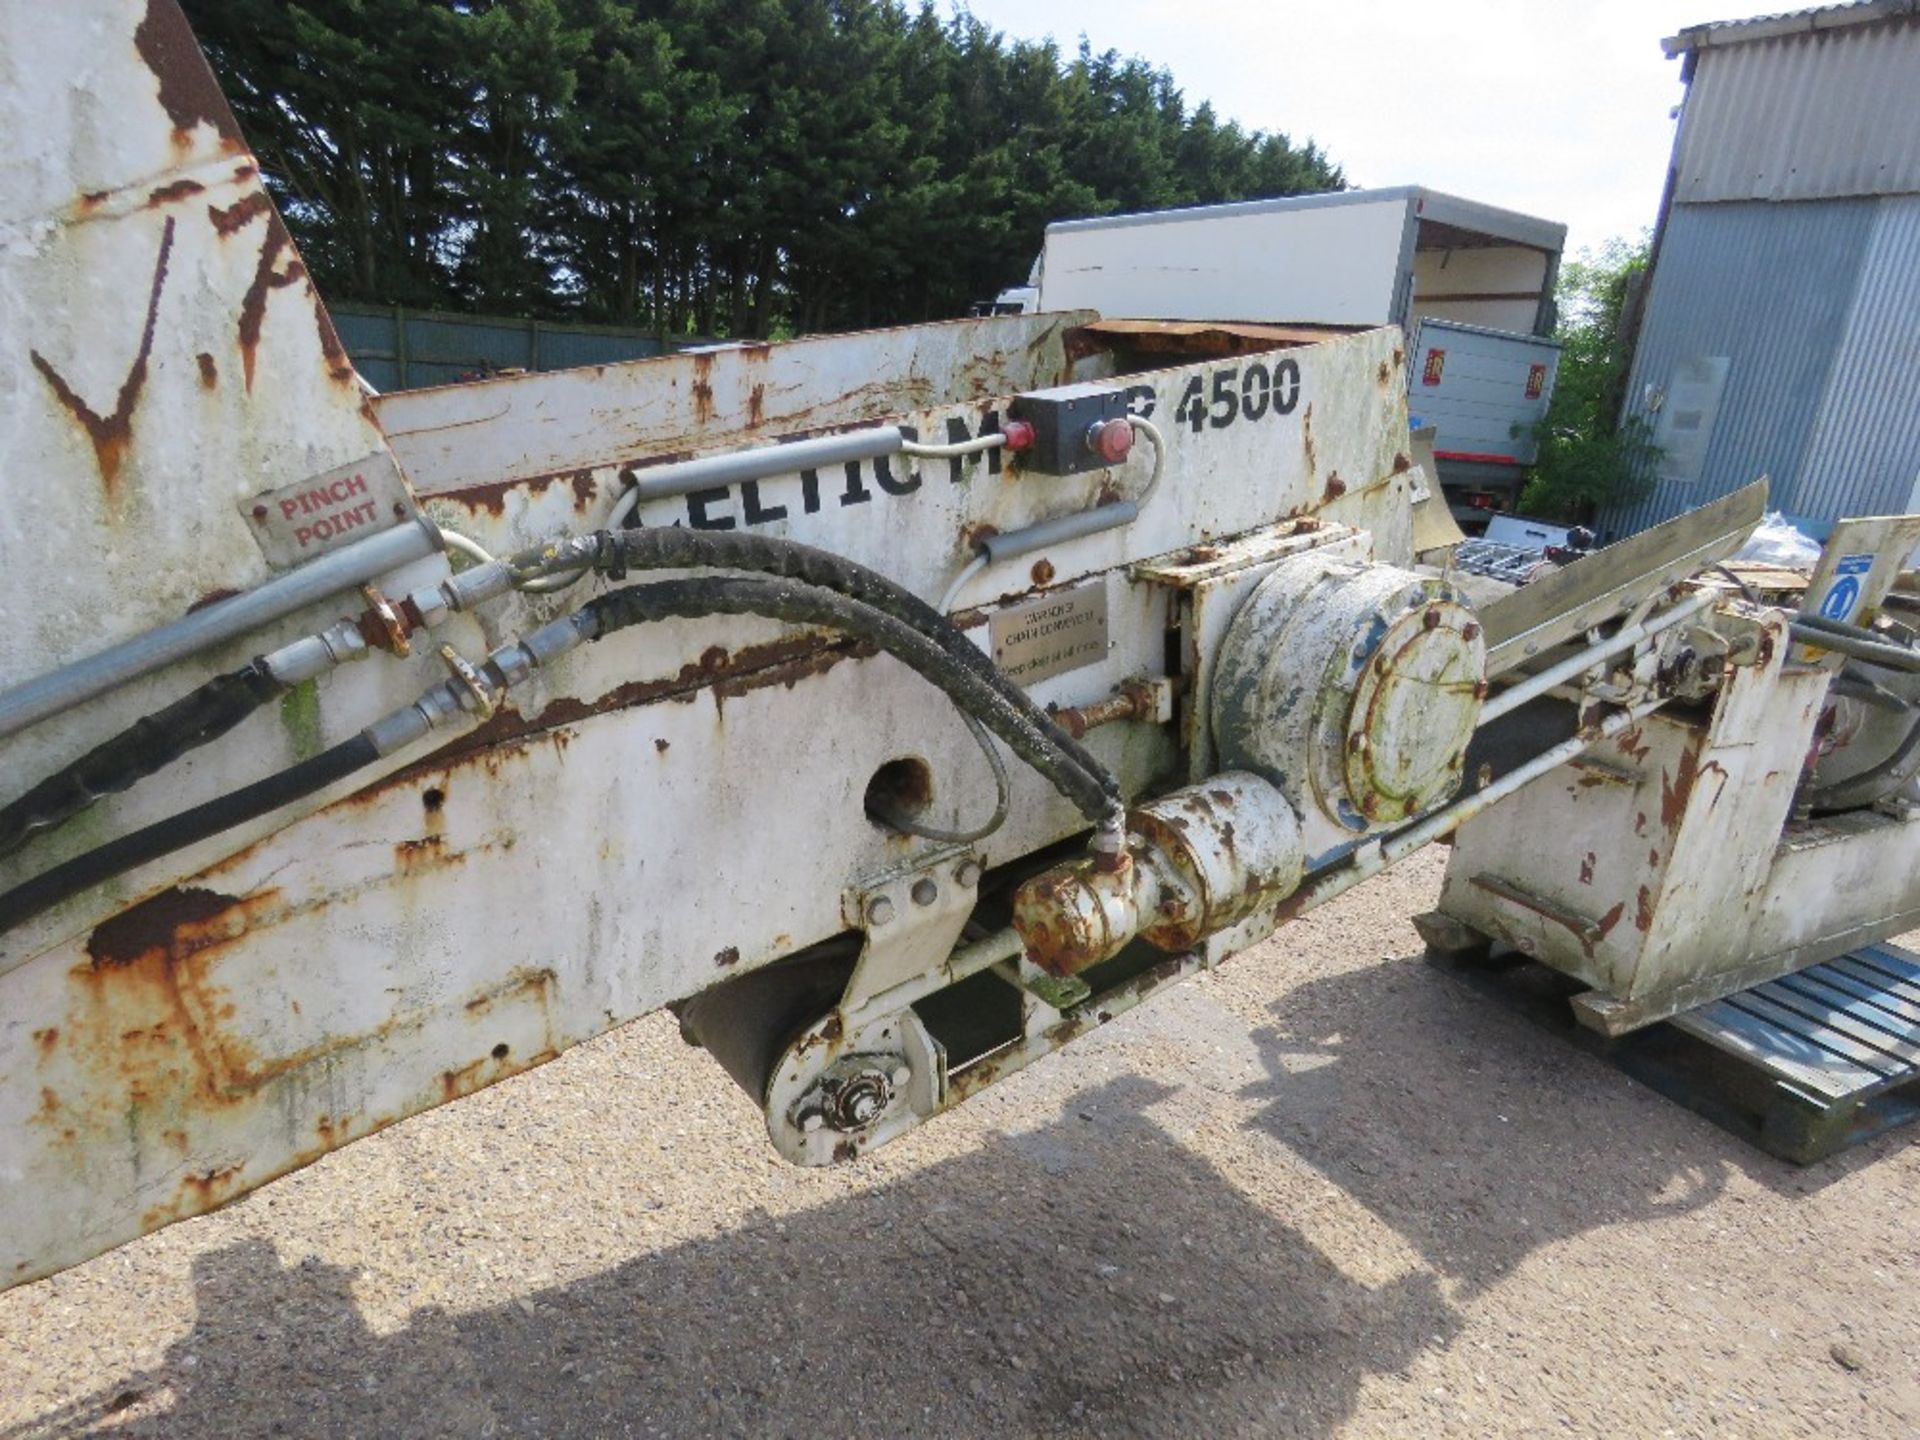 CELTIC MINOR 4500 MK1 ROADHEADER TUNNEL MINING EXCAVATOR MACHINE MANUFACTURED BY METAL INNOVATIONS L - Image 9 of 25